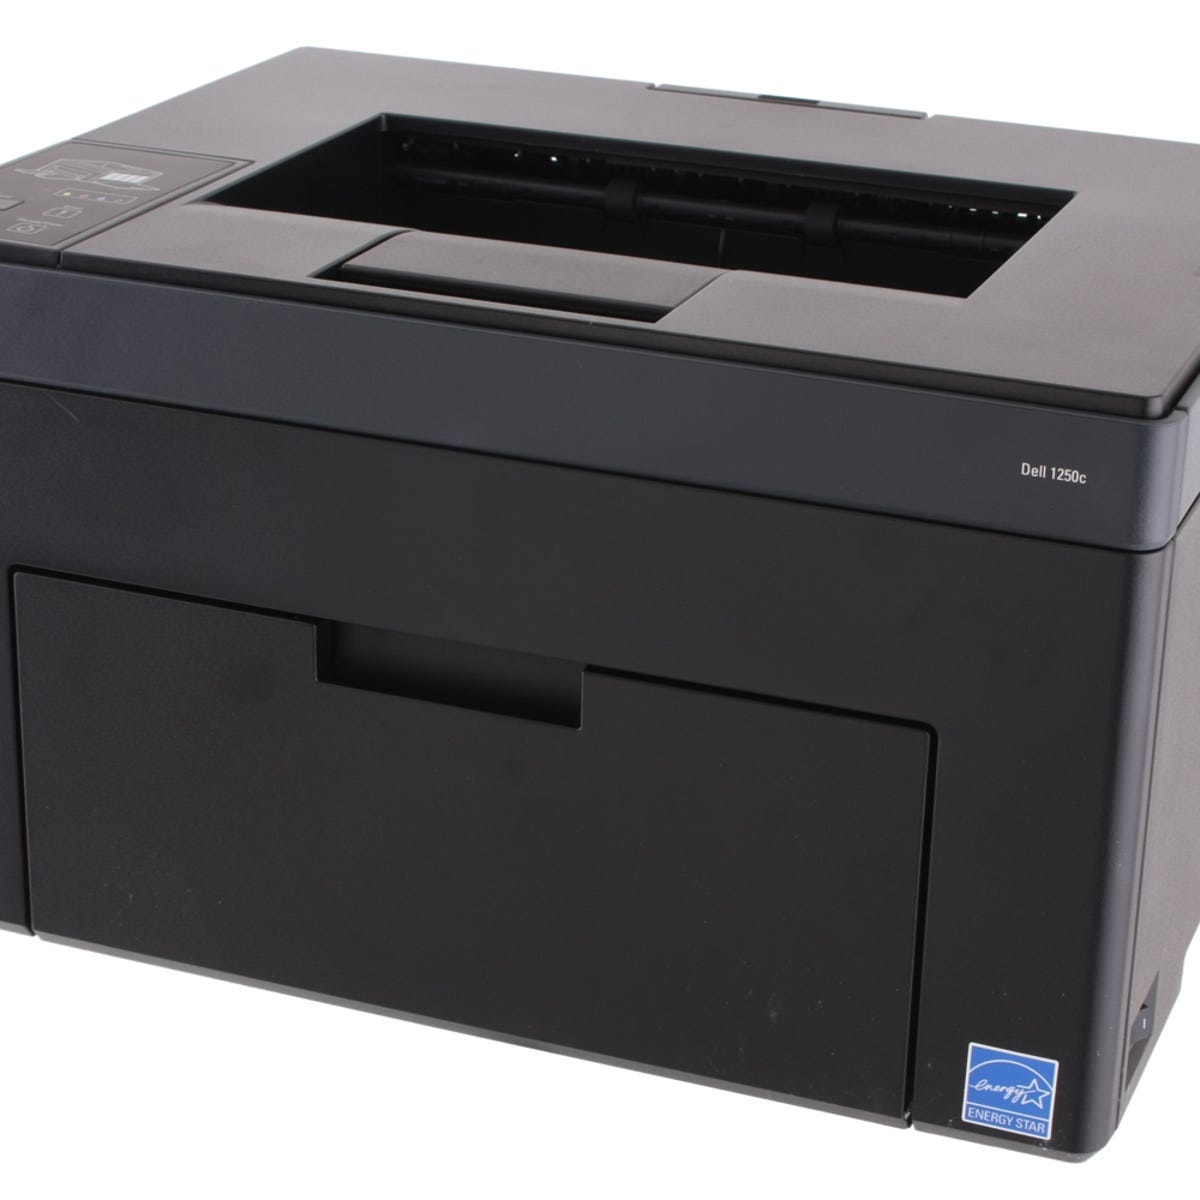 Dell 1250c Color LED Laser-Class Printer review: Dell 1250c Color LED  Laser-Class Printer - CNET